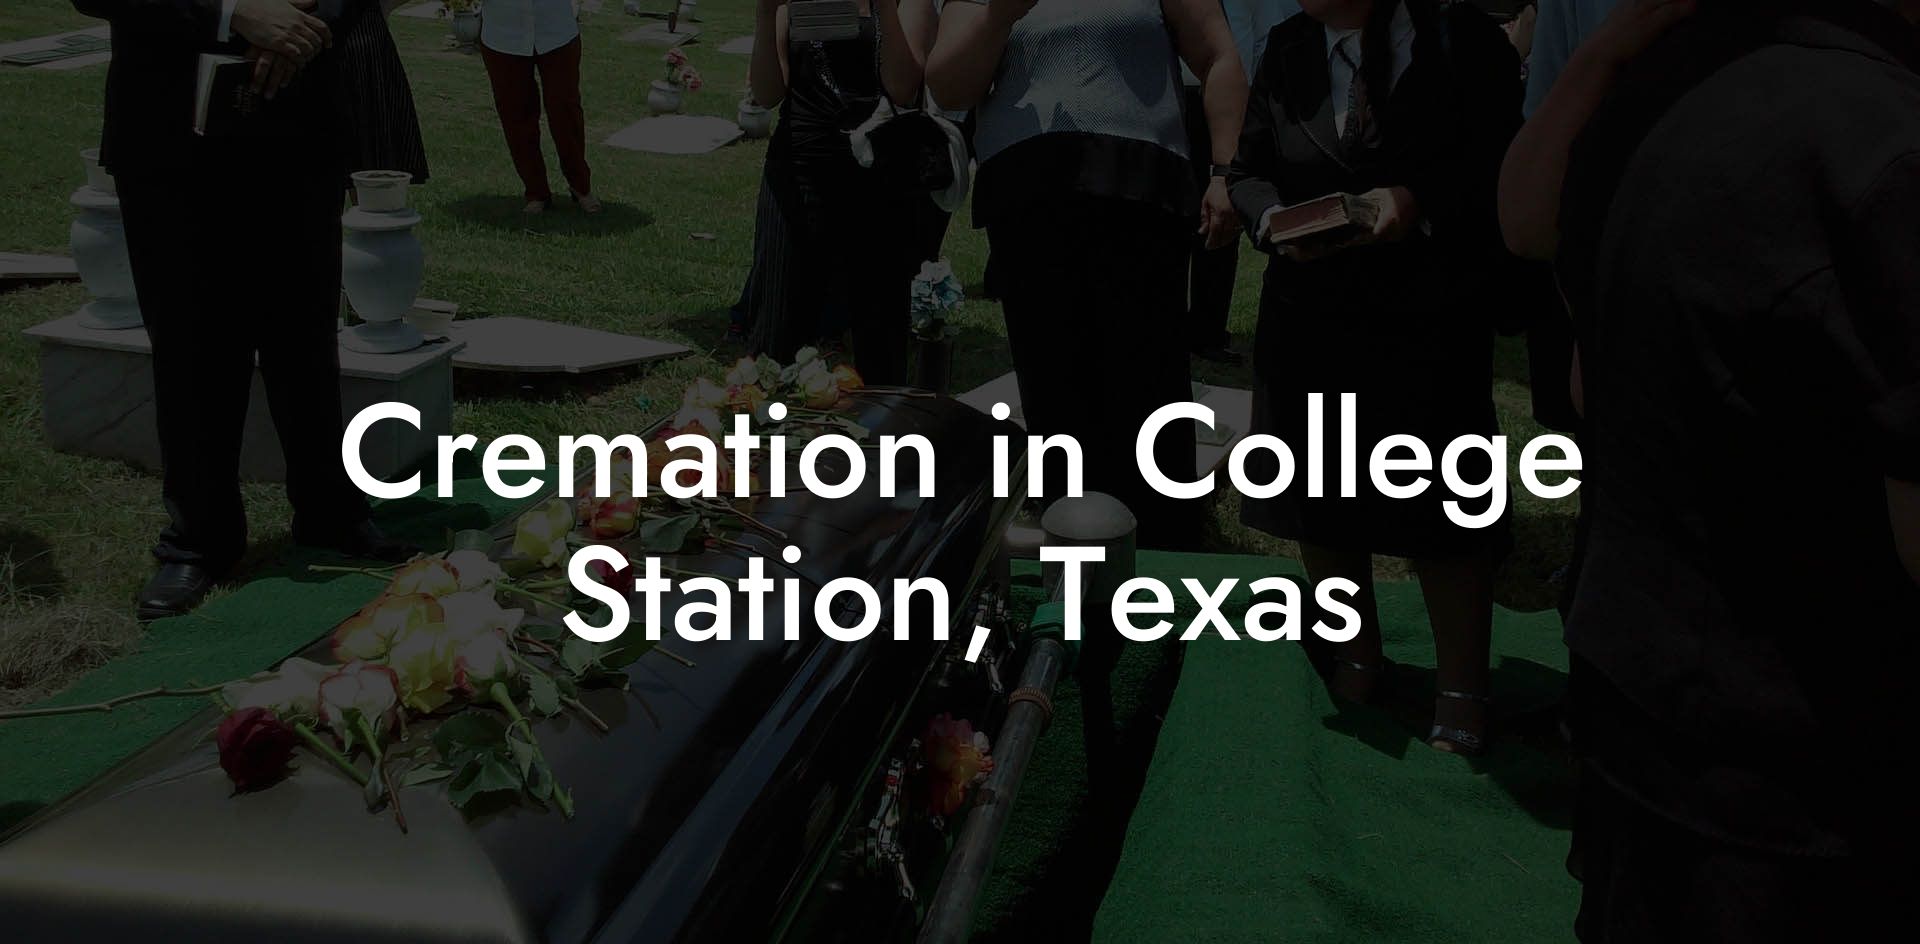 Cremation in College Station, Texas